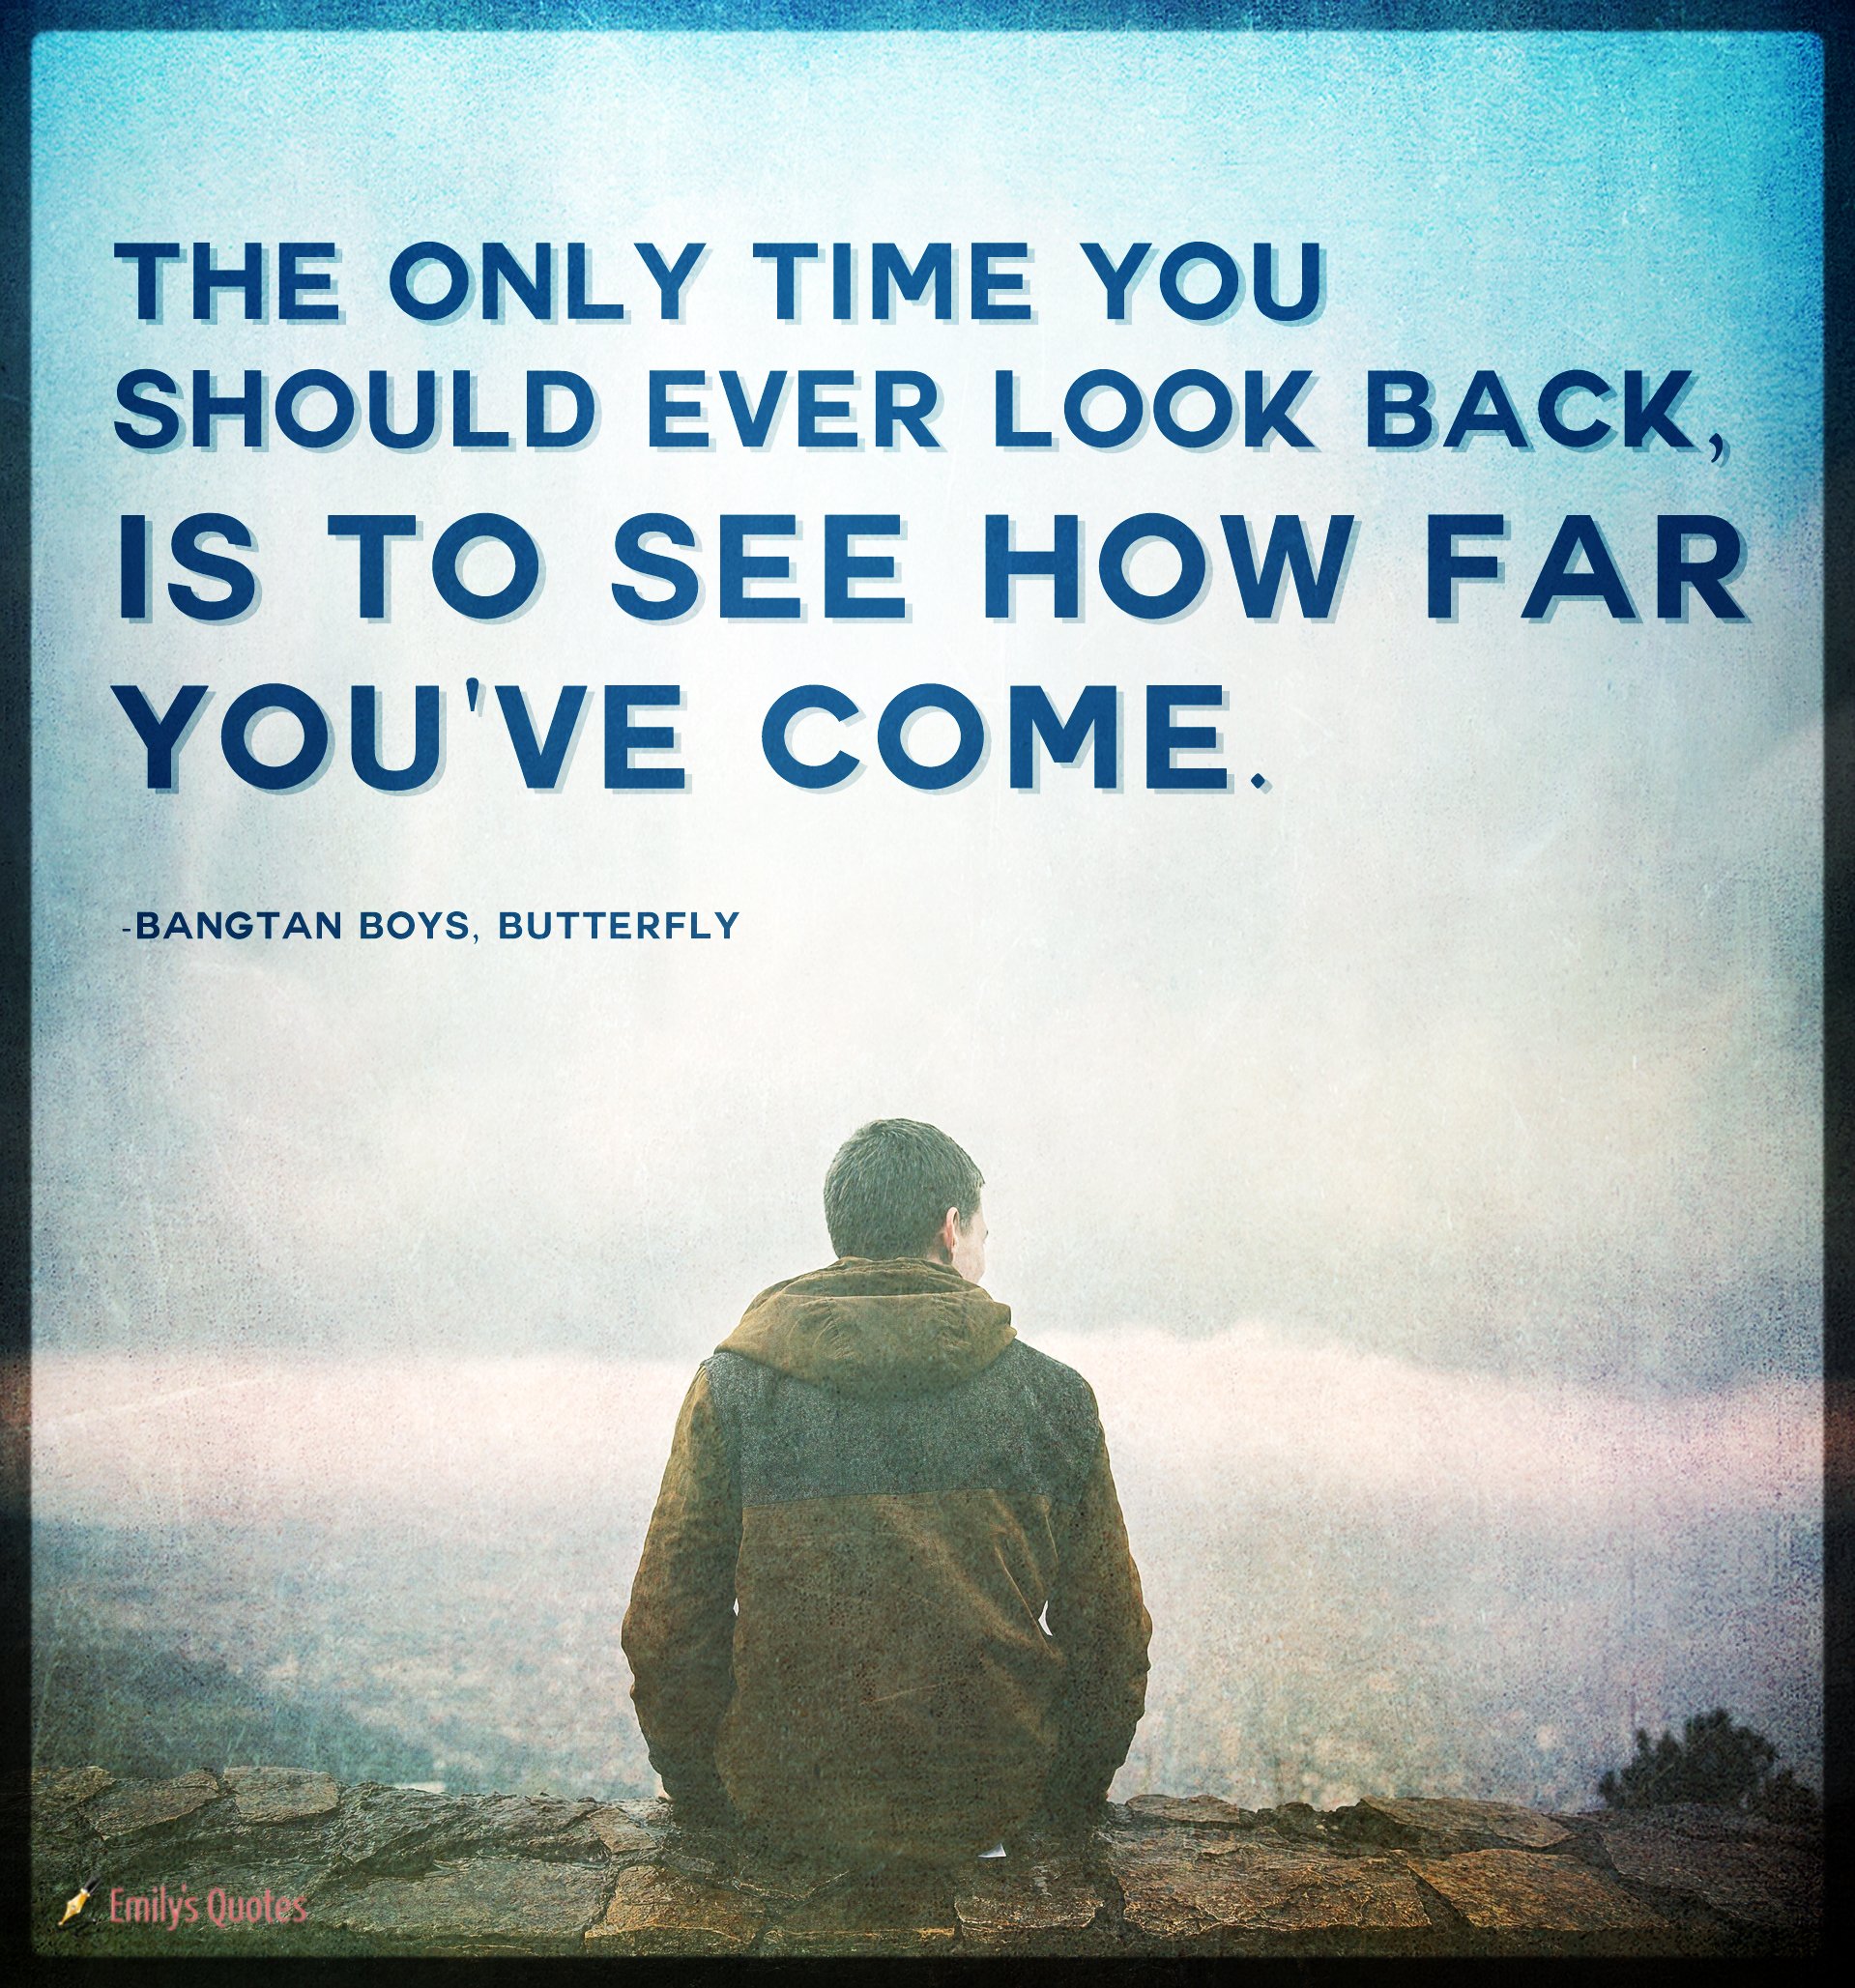 The only time you should ever look back, is to see how far you’ve come